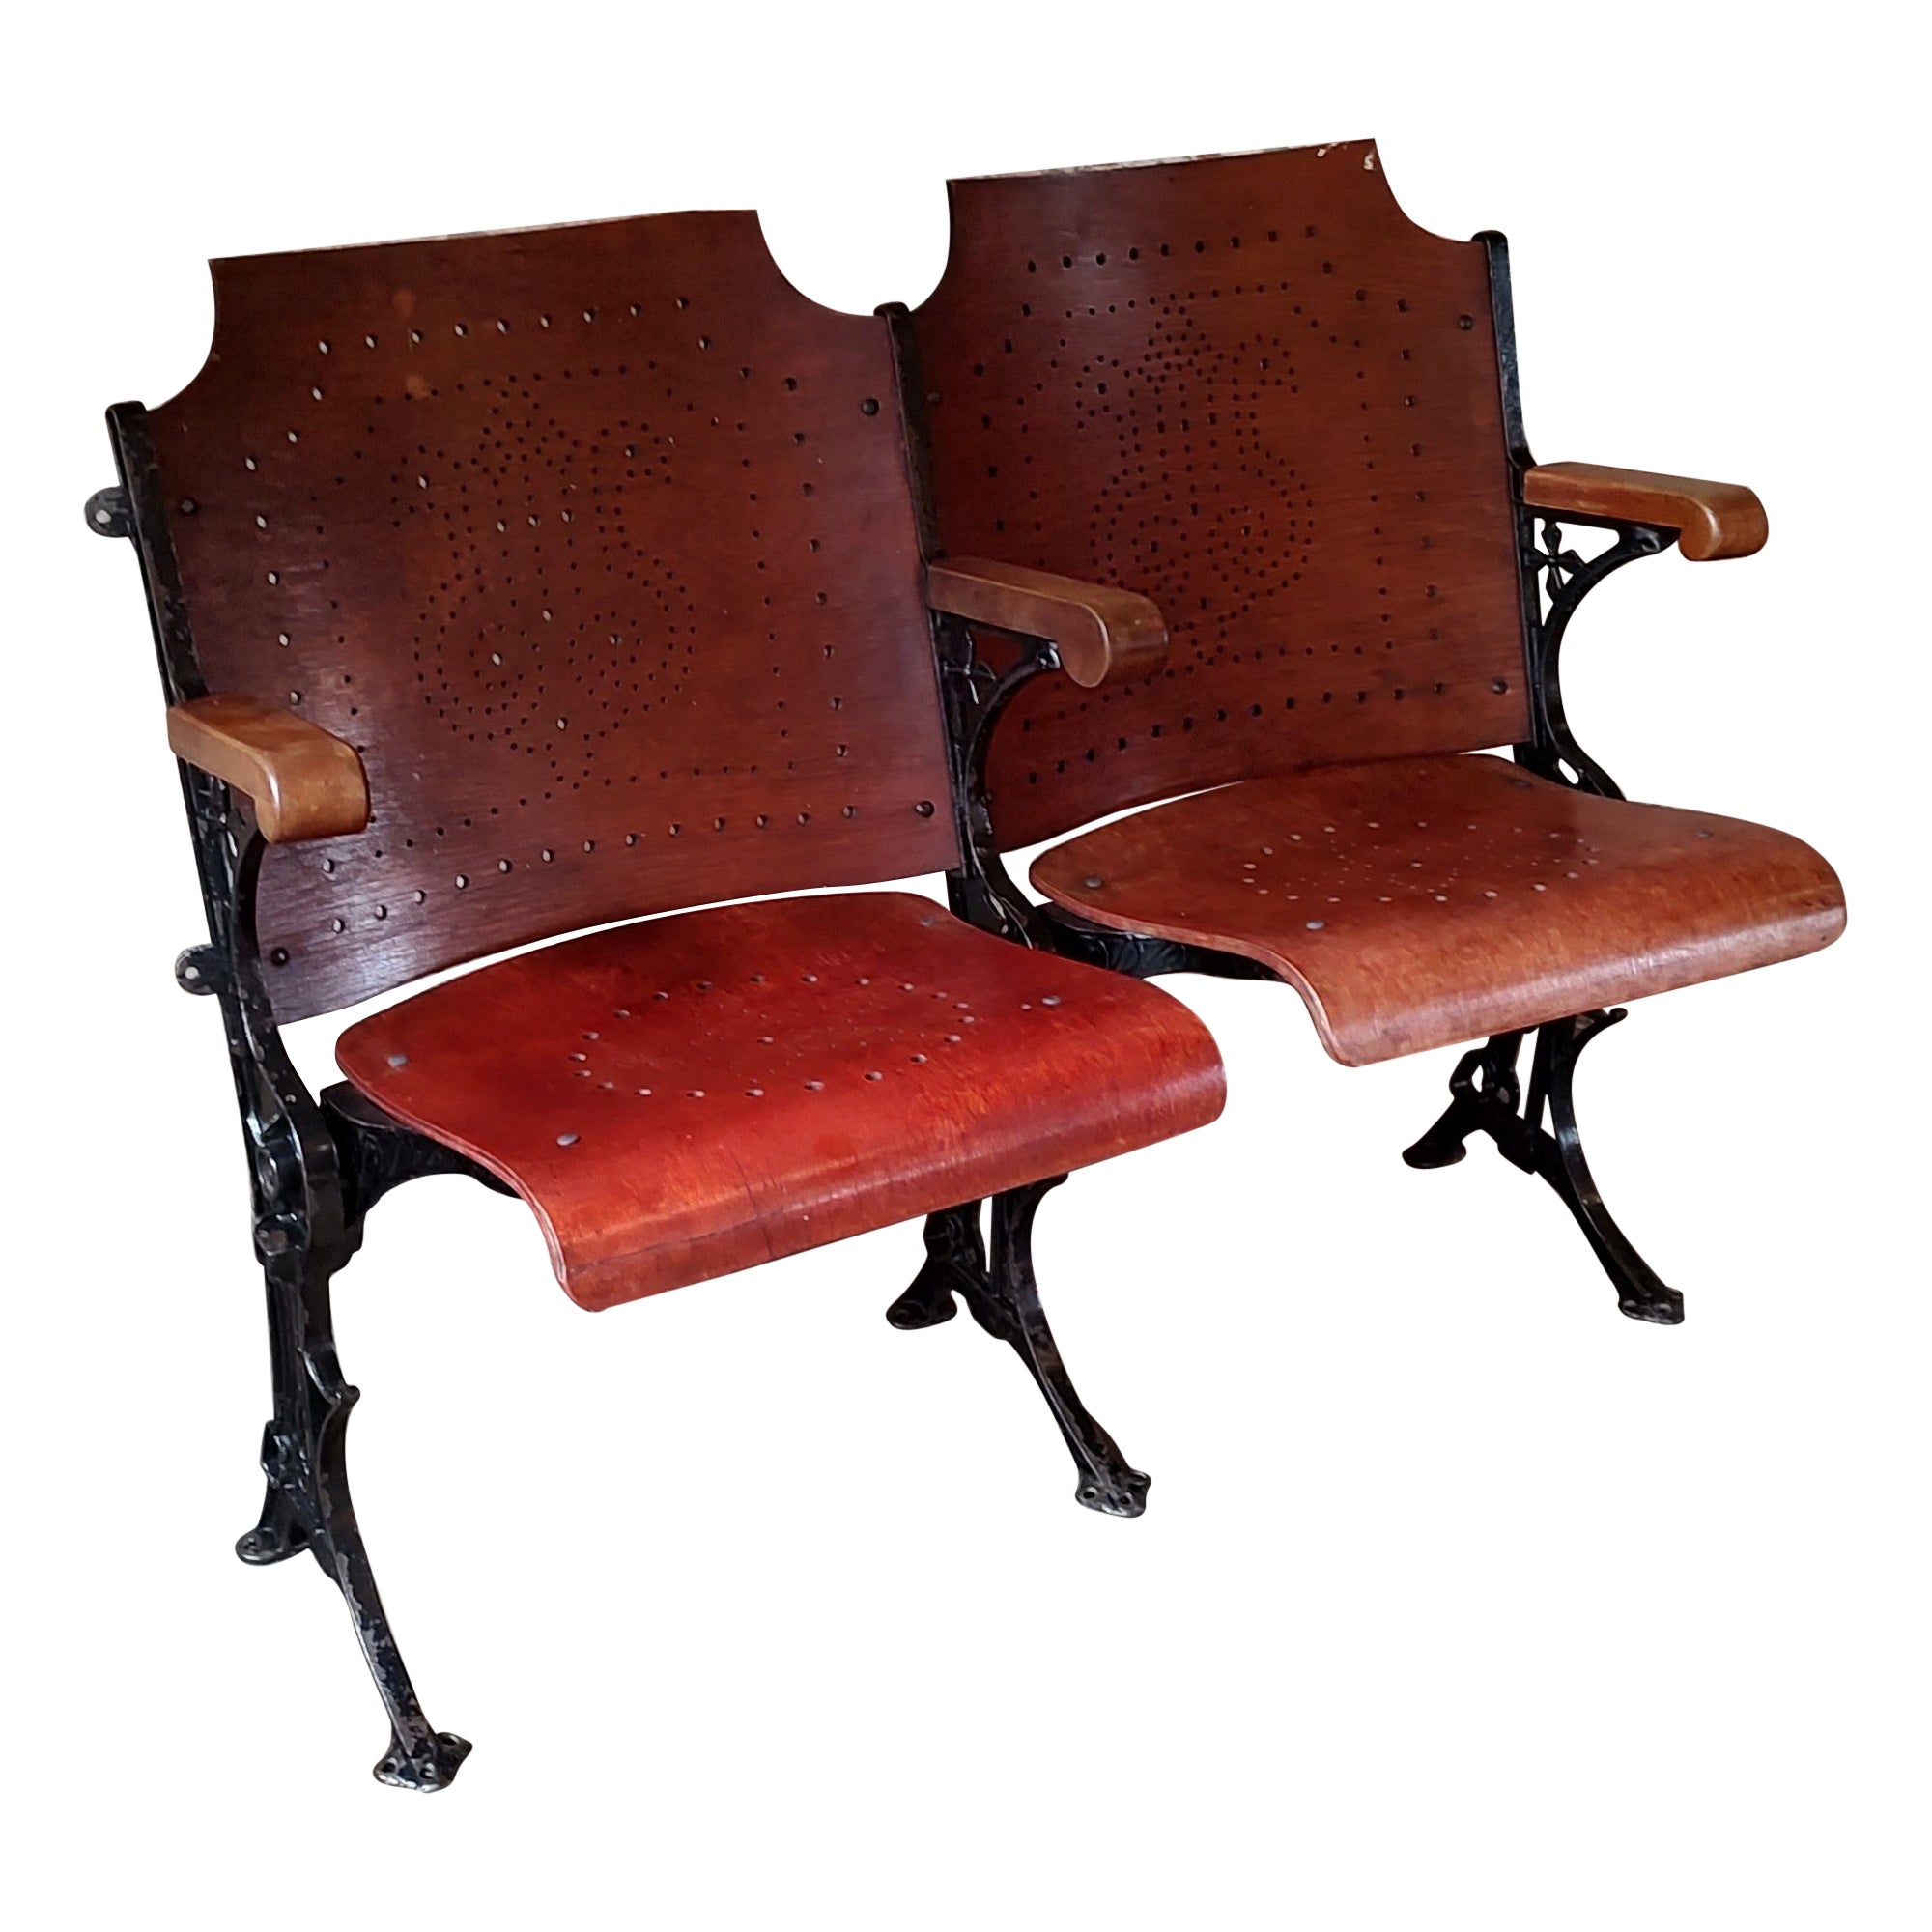 Antique Theater Seats For Sale